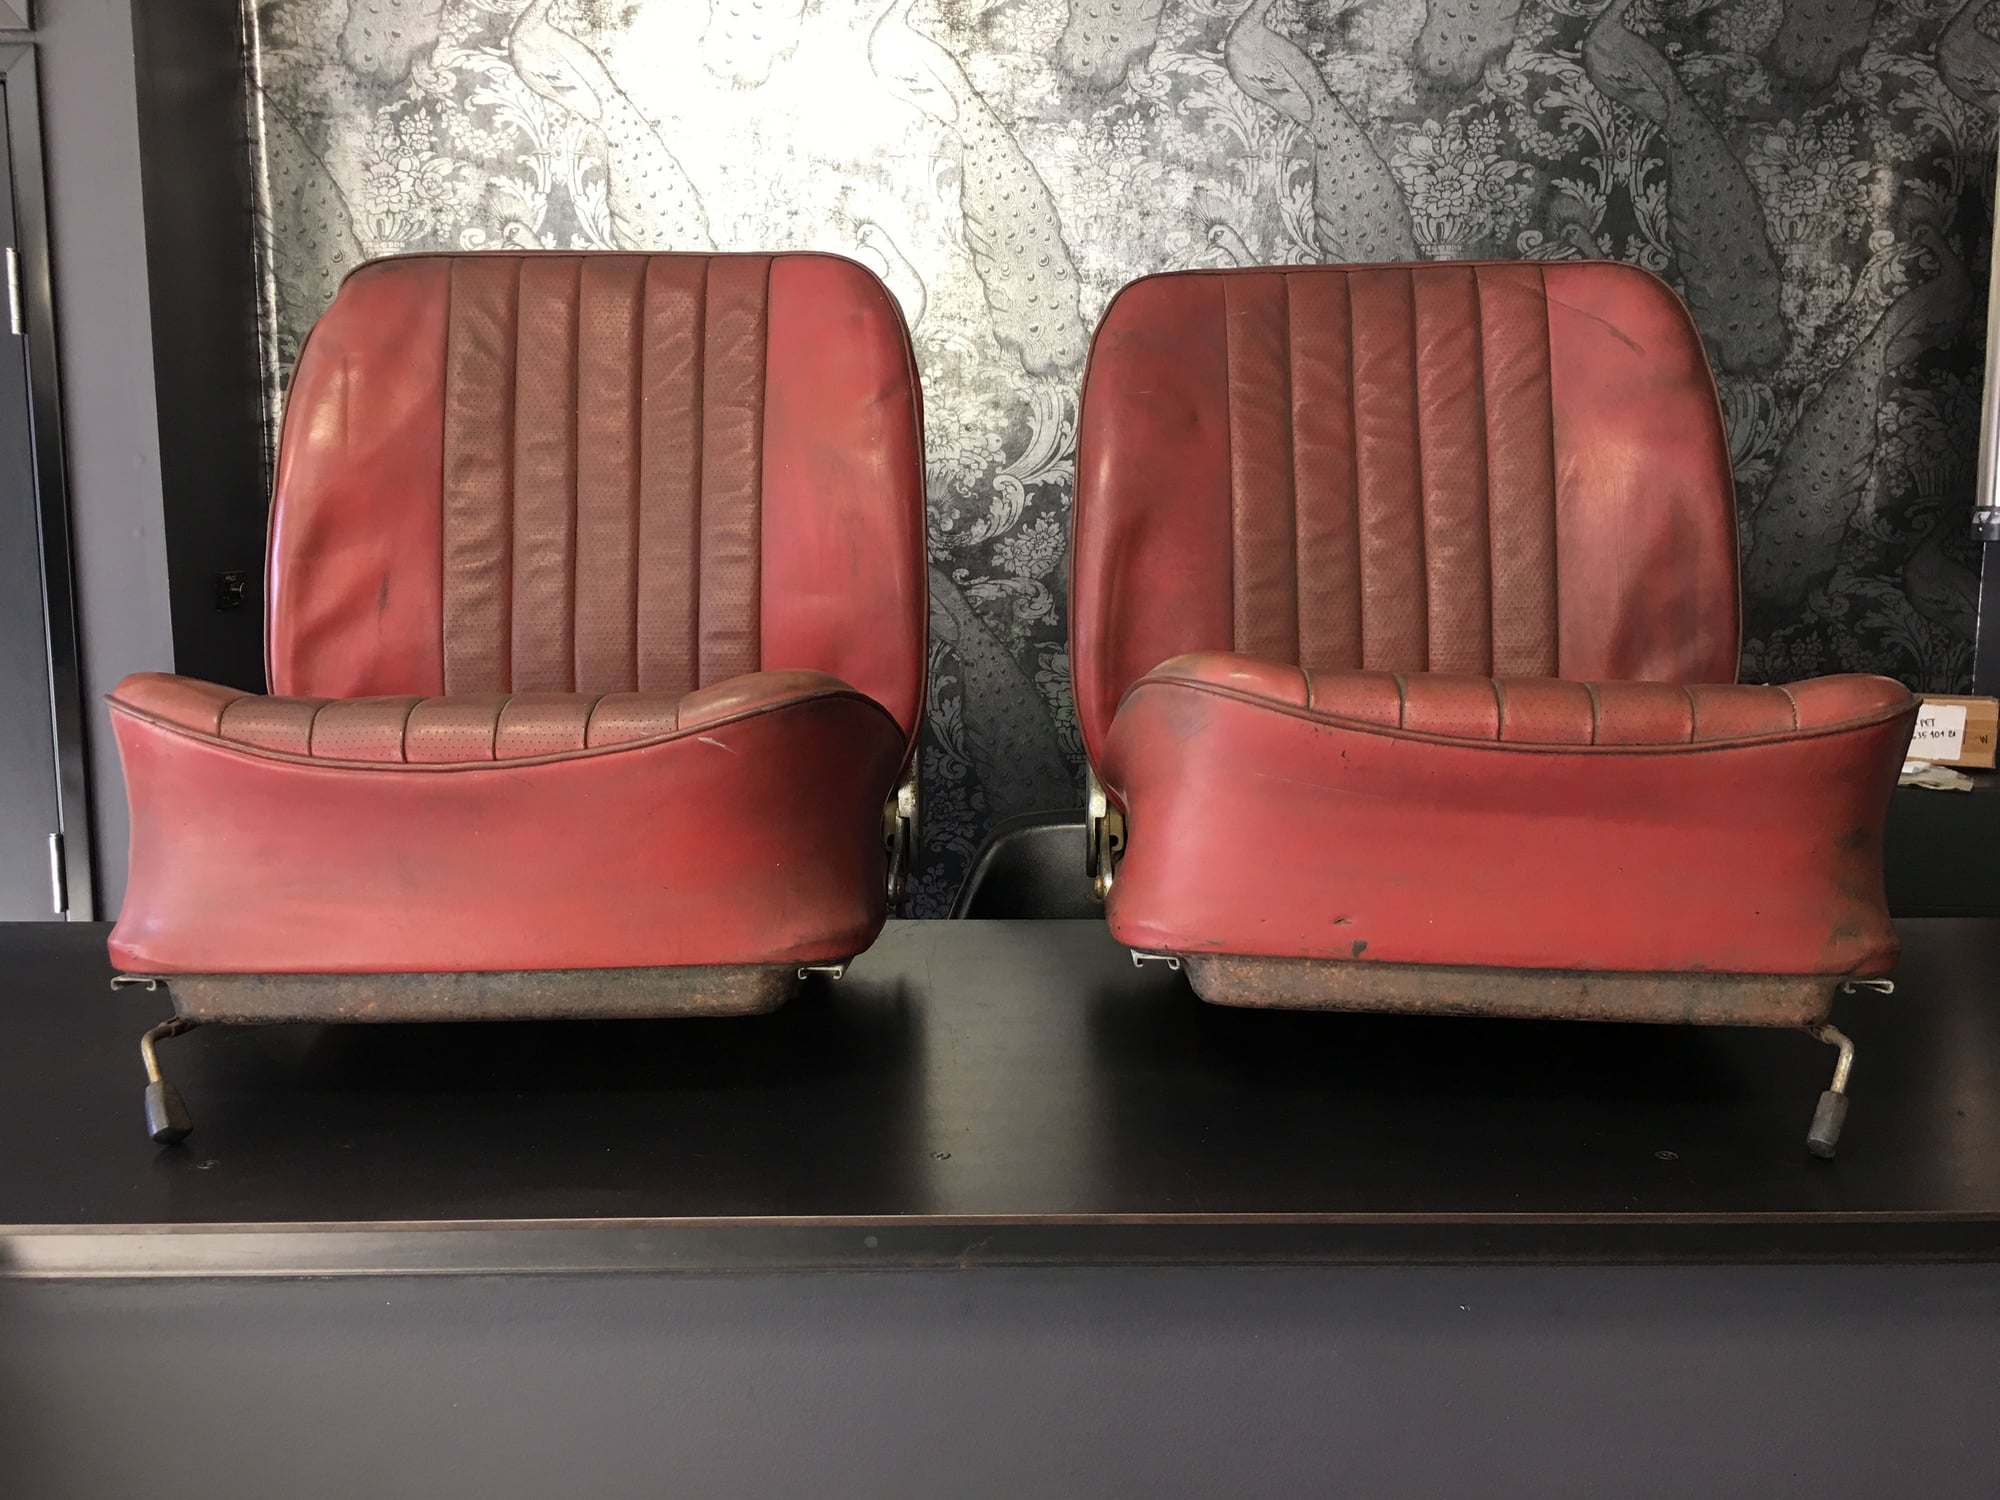 Interior/Upholstery - PORSCHE 901-911-912 ORIGINAL FRONT SEATS EARLY 911, 911-L, 911-S USED - Used - Los Angeles, CA 90026, United States